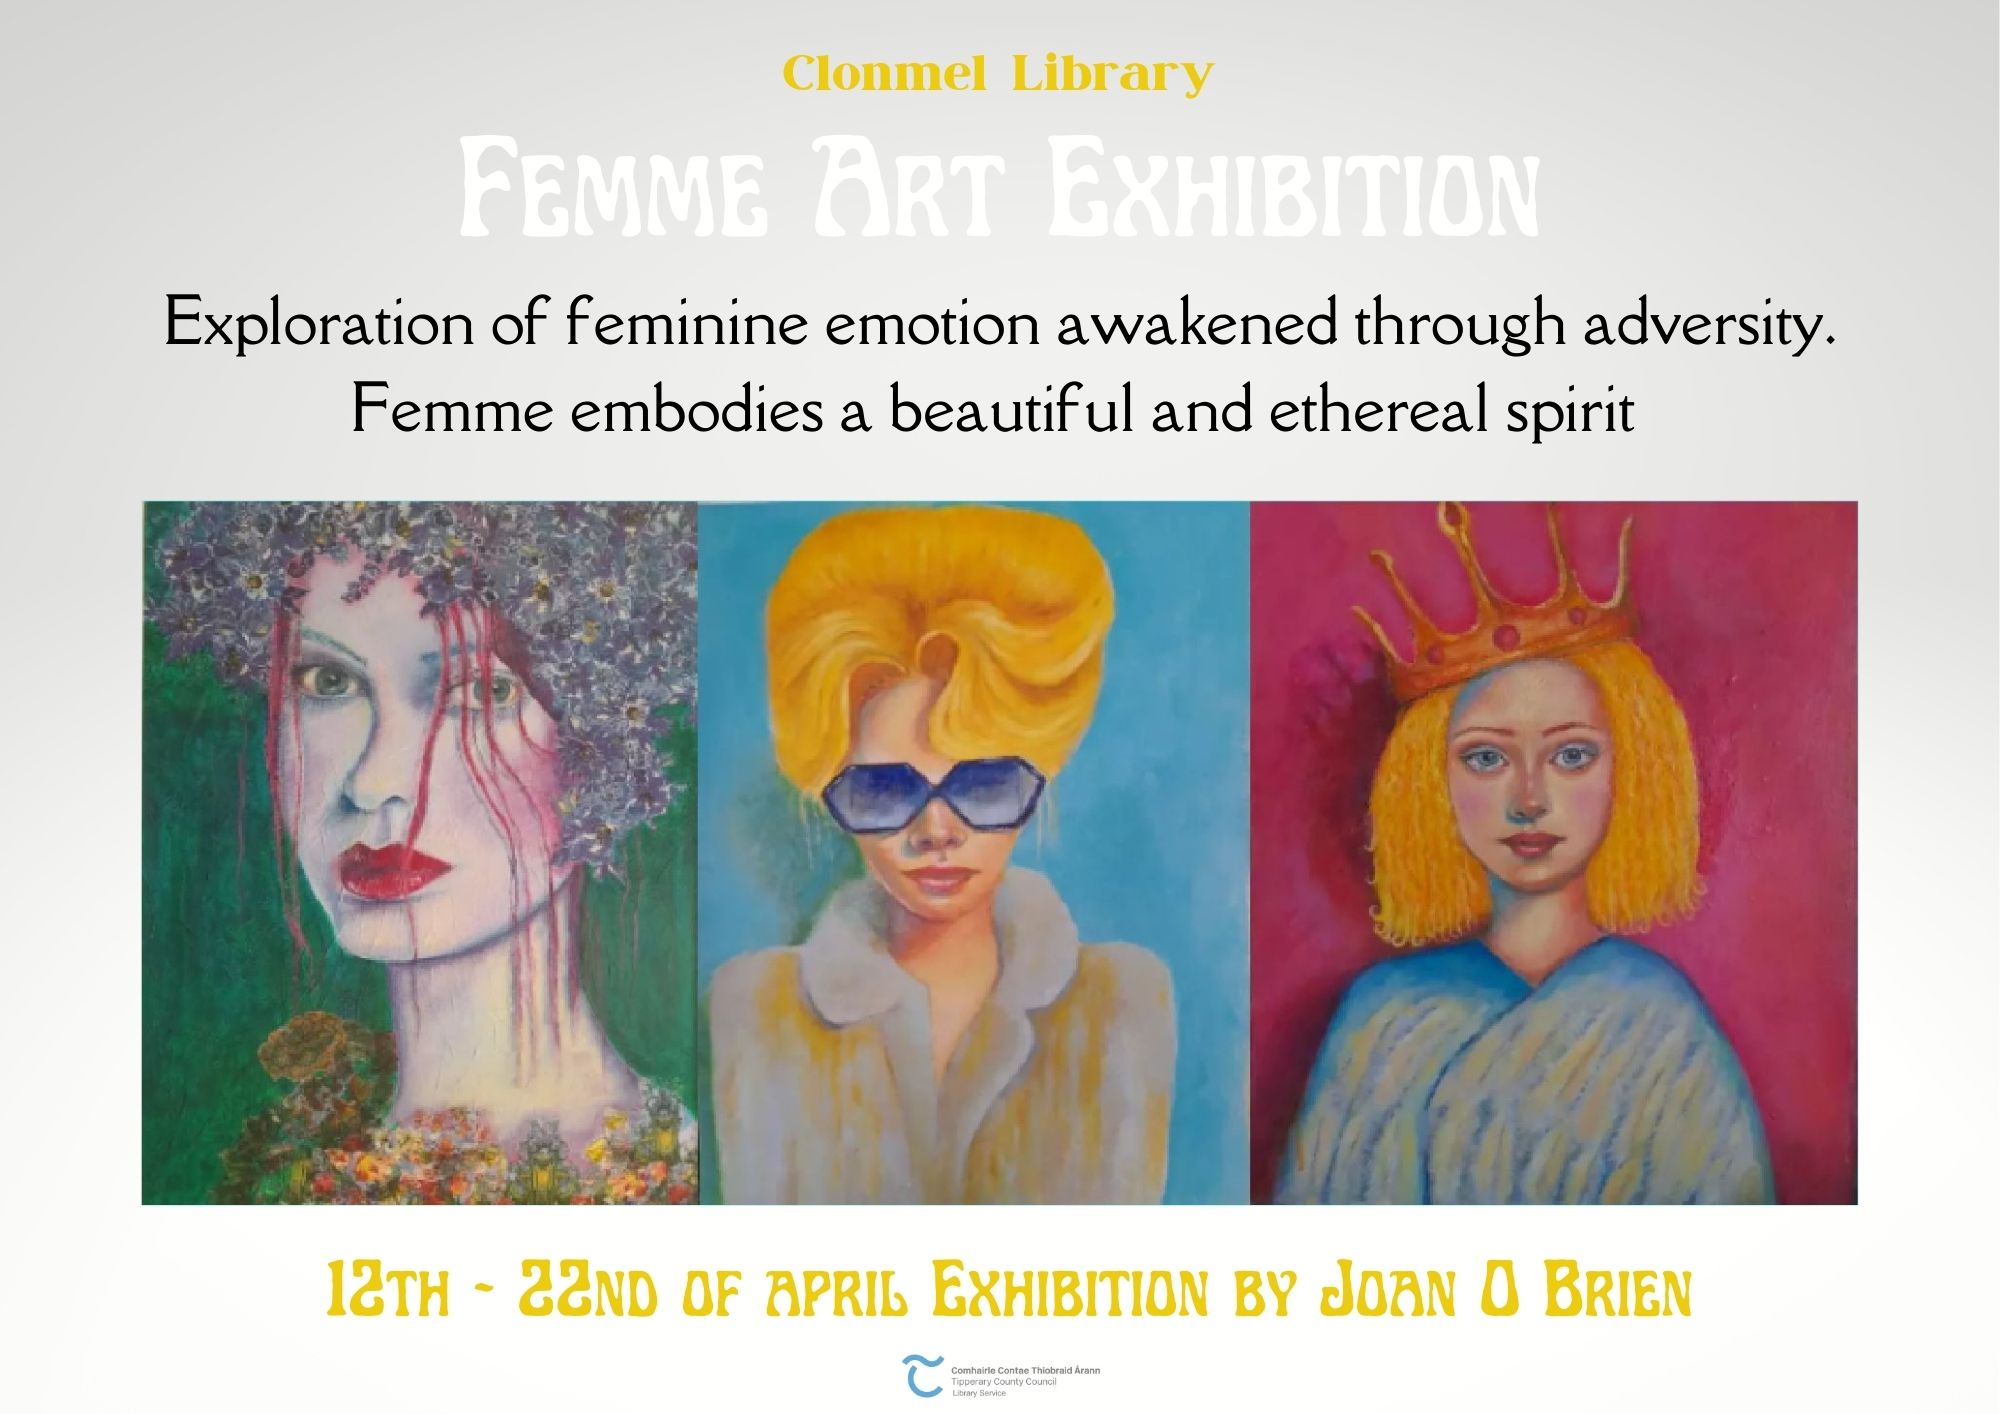 poster for art exhibition in clonmel library